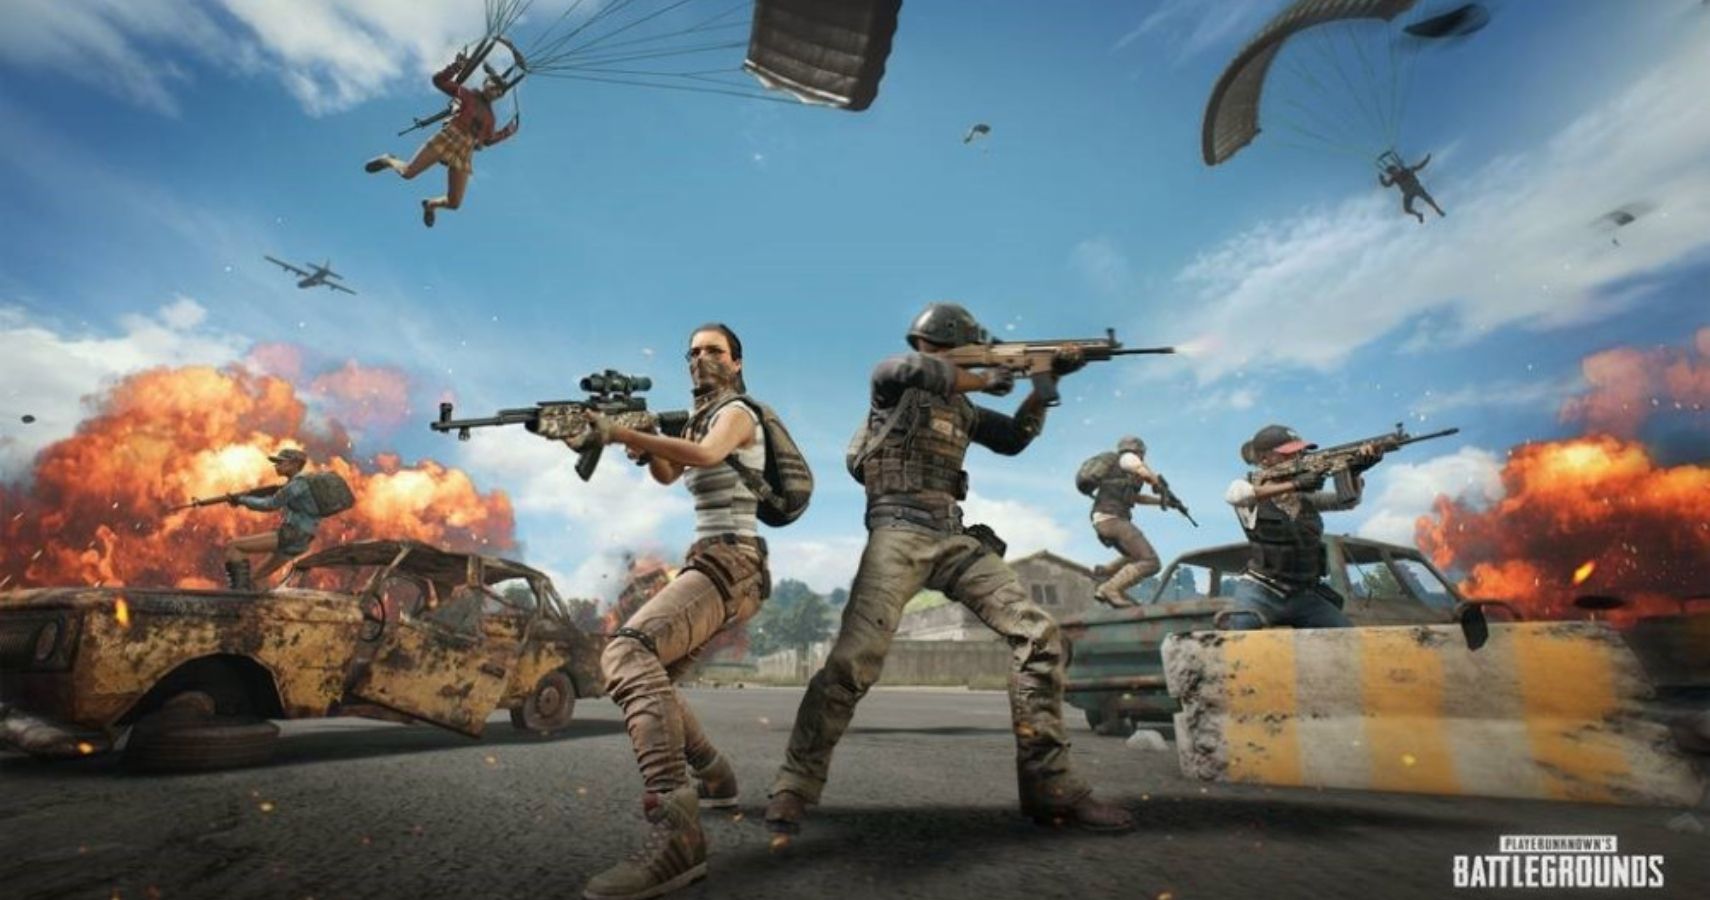 PUBG Wins 2018 Game Of The Year At Valves Steam Awards As Voted On By Players